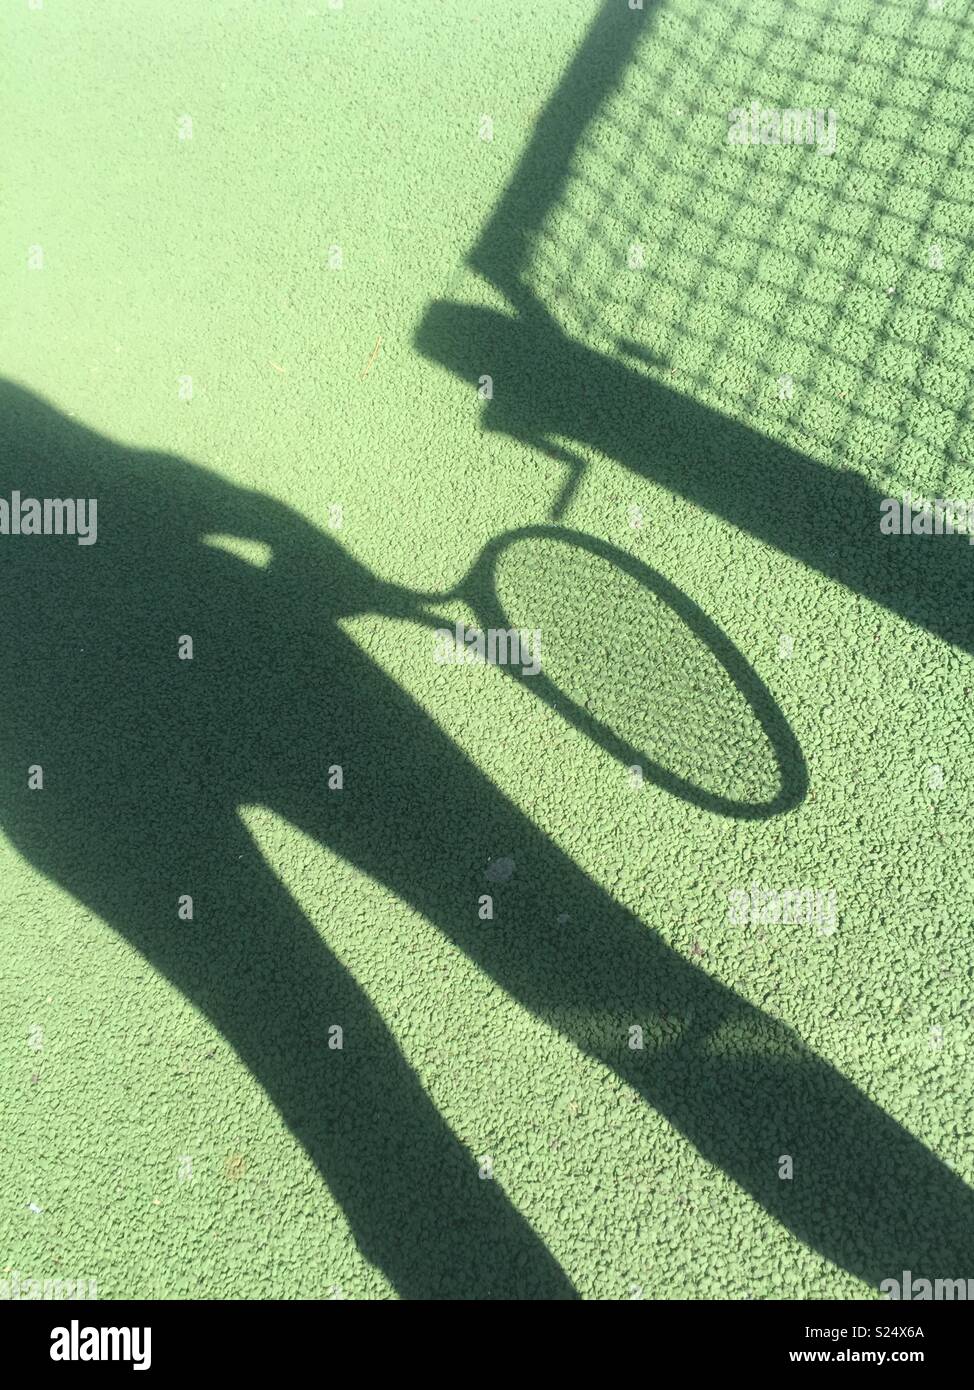 Shadow of tennis player Stock Photo